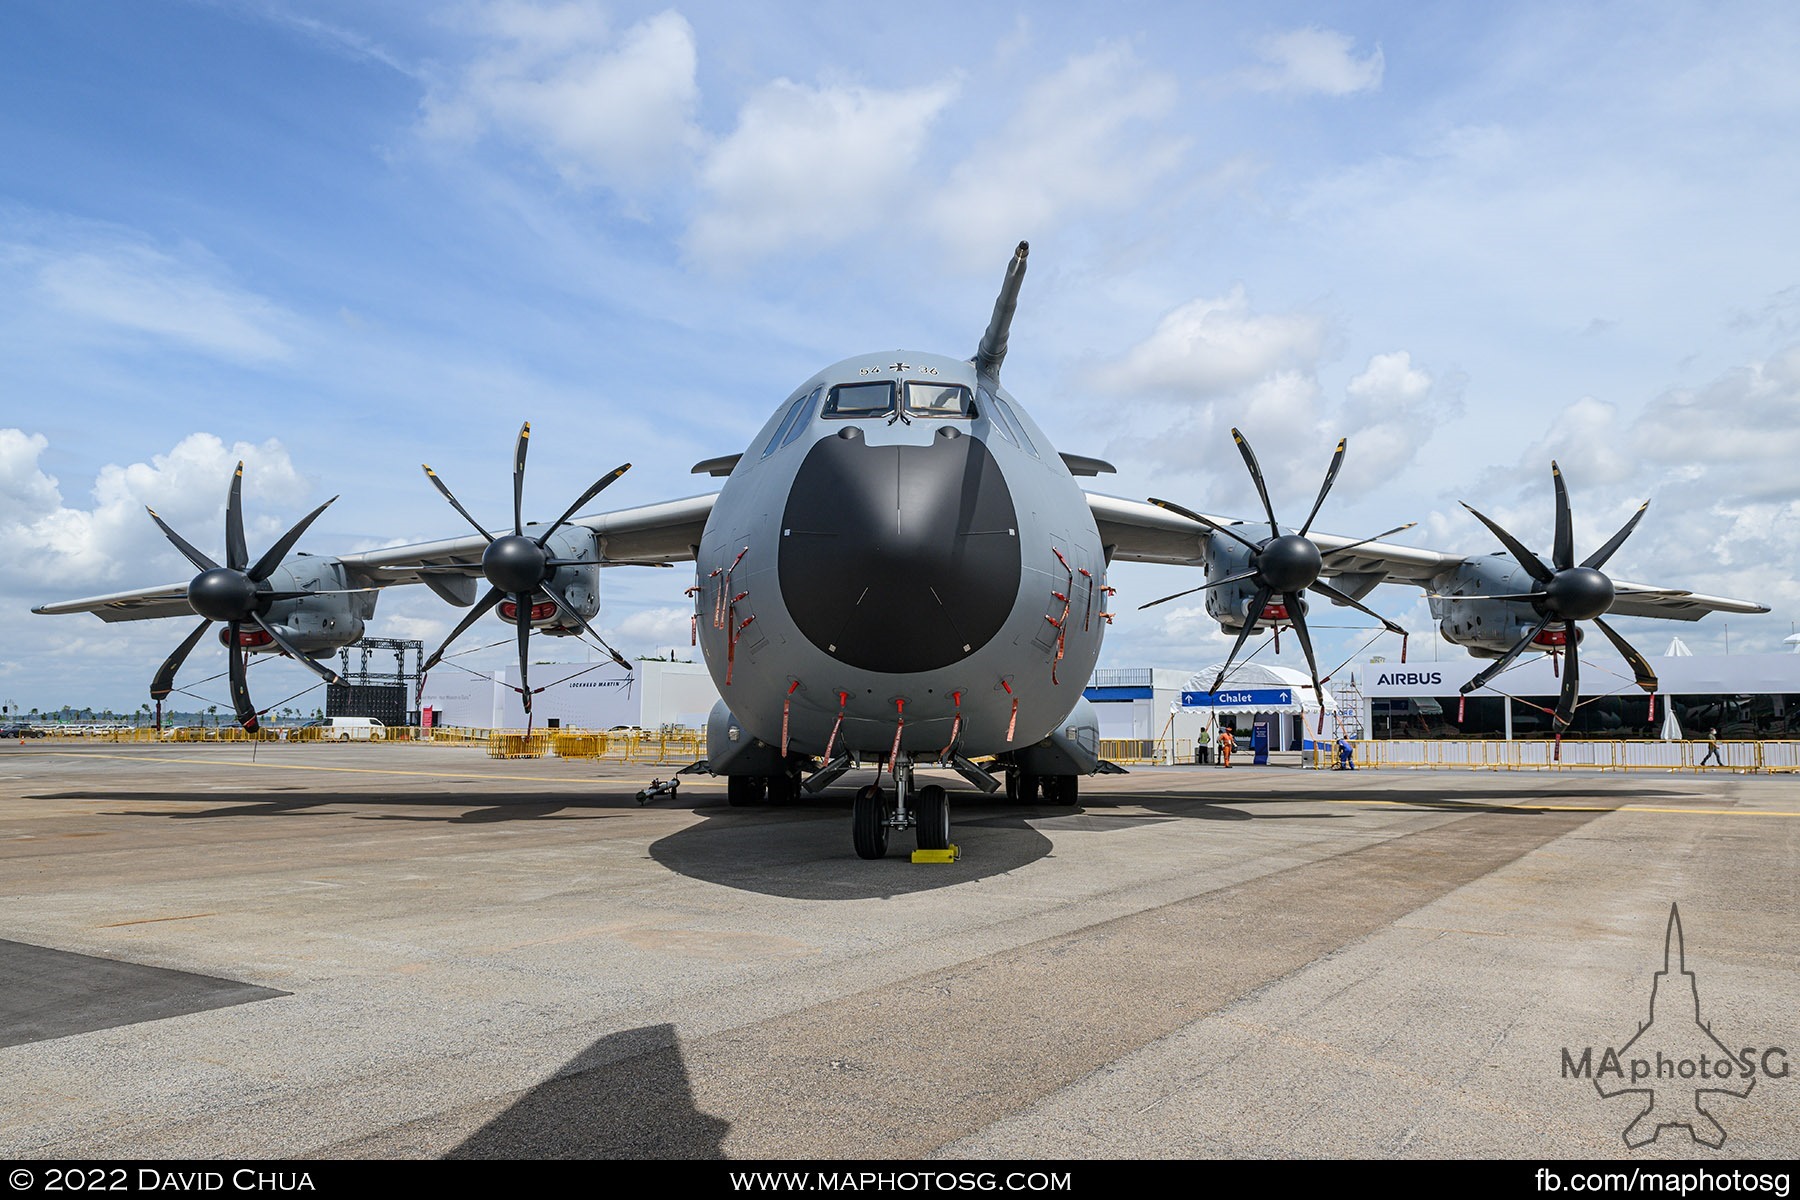 Head on with the Luftwaffe A400M Atlas